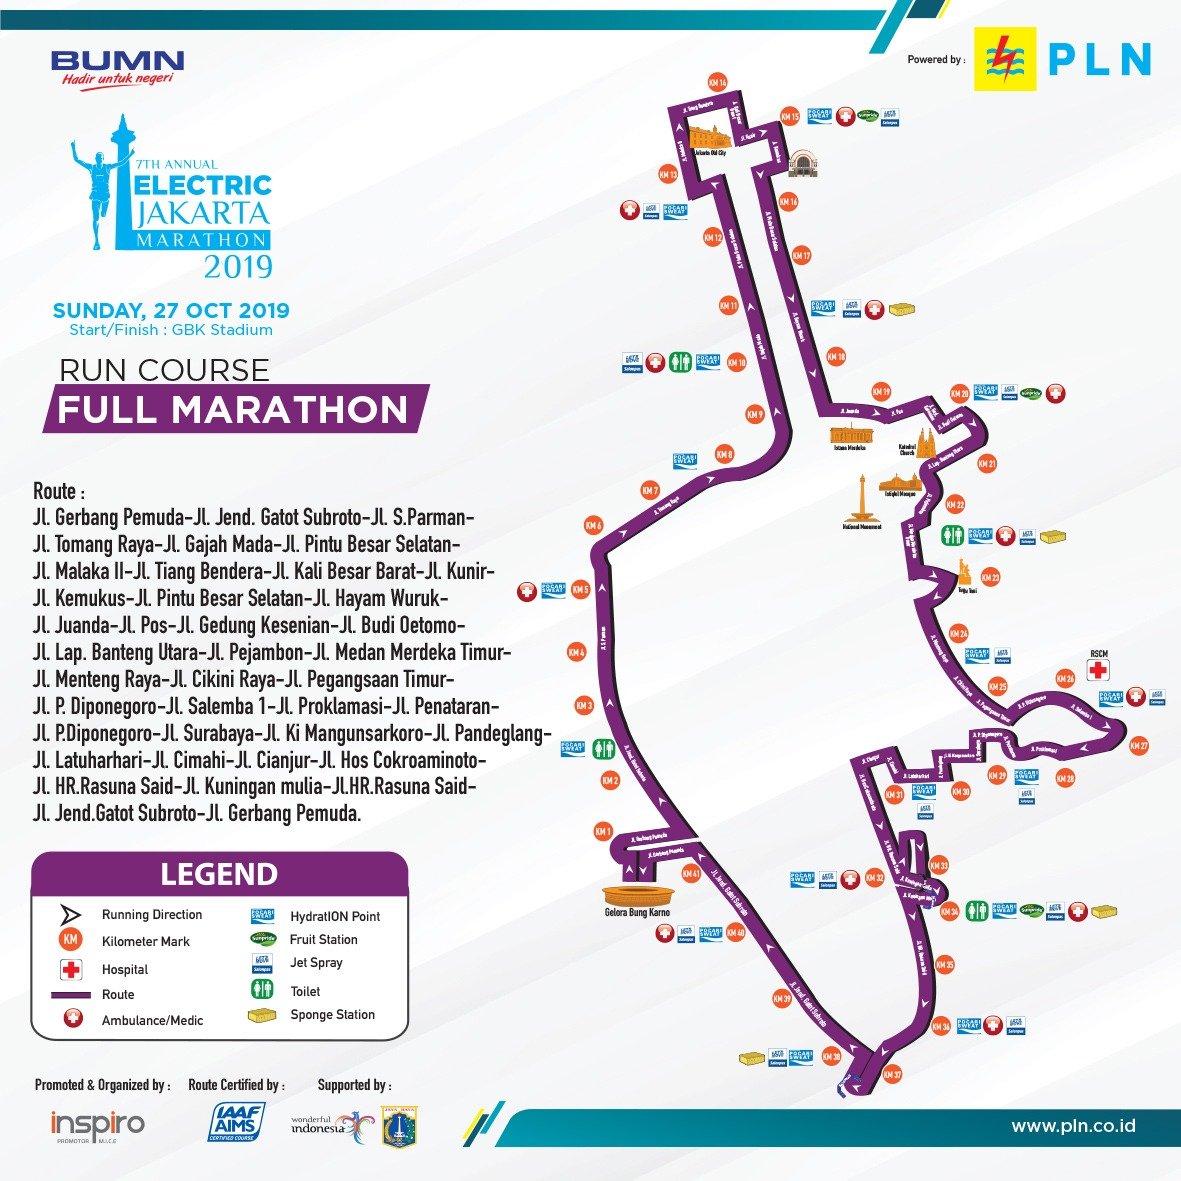 Here we go ! Electric Jakarta Marathon 2019 Routes revealed. Nothing’s change. Same as Last Year, as most of runners were happy about these new routes. 
Still iconic scenery along the course. Stretch your performance.
#lightupyourenergi
#energioptimisme
#jakartamarathon